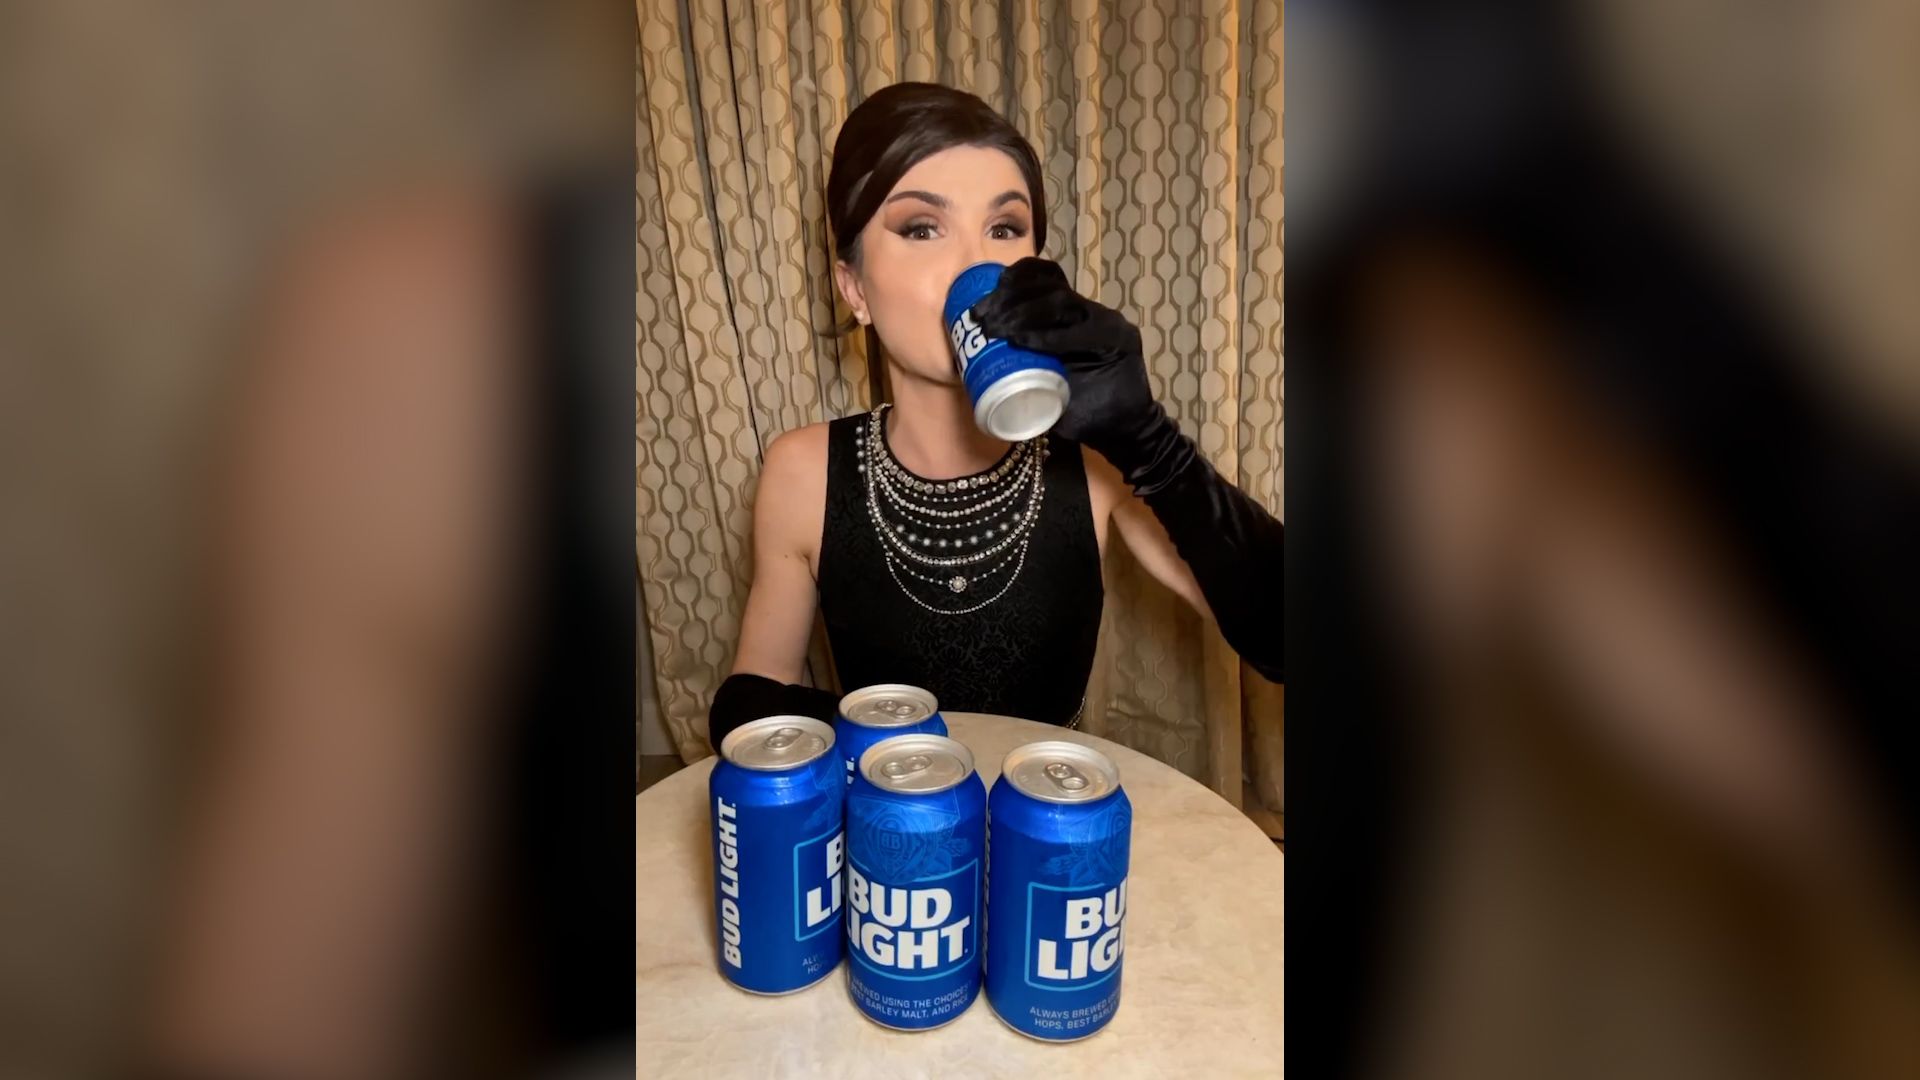 Kid Rock Shoots Cases Of Bud Light In